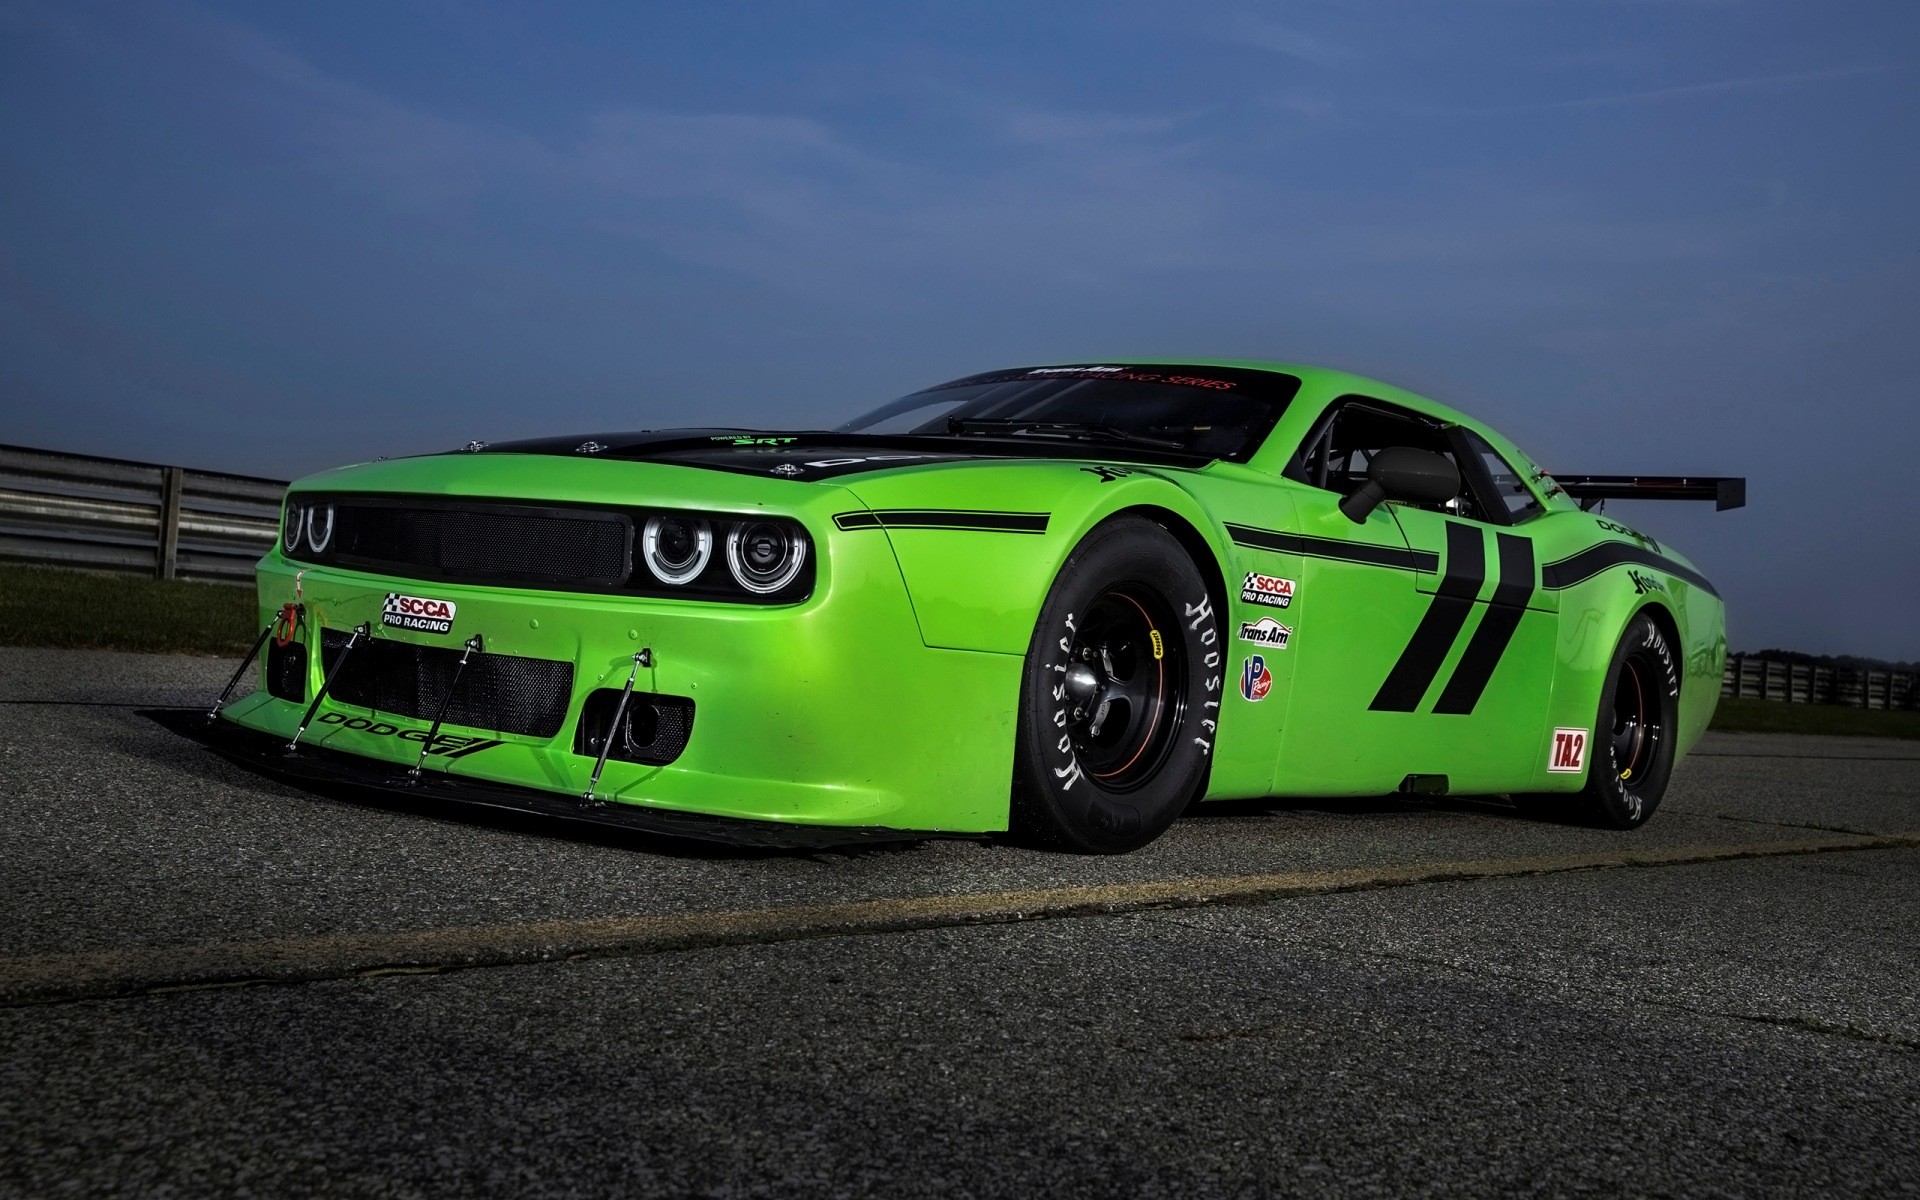 General 1920x1200 Dodge Challenger Dodge green cars vehicle car muscle cars American cars Stellantis race cars